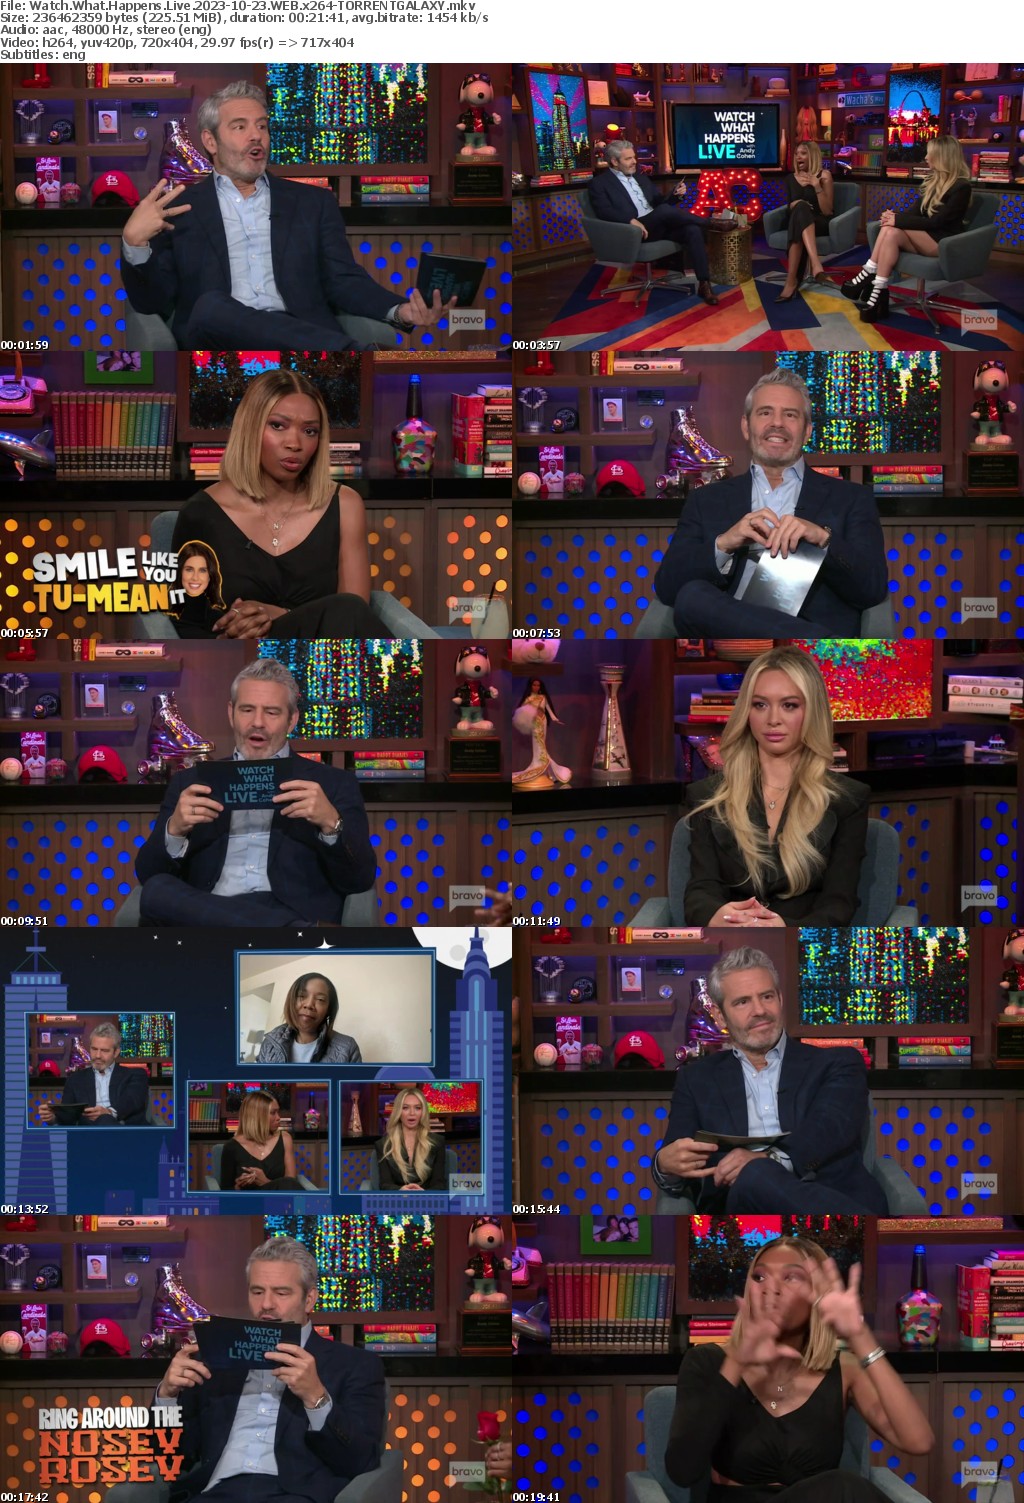 Watch What Happens Live 2023-10-23 WEB x264-GALAXY